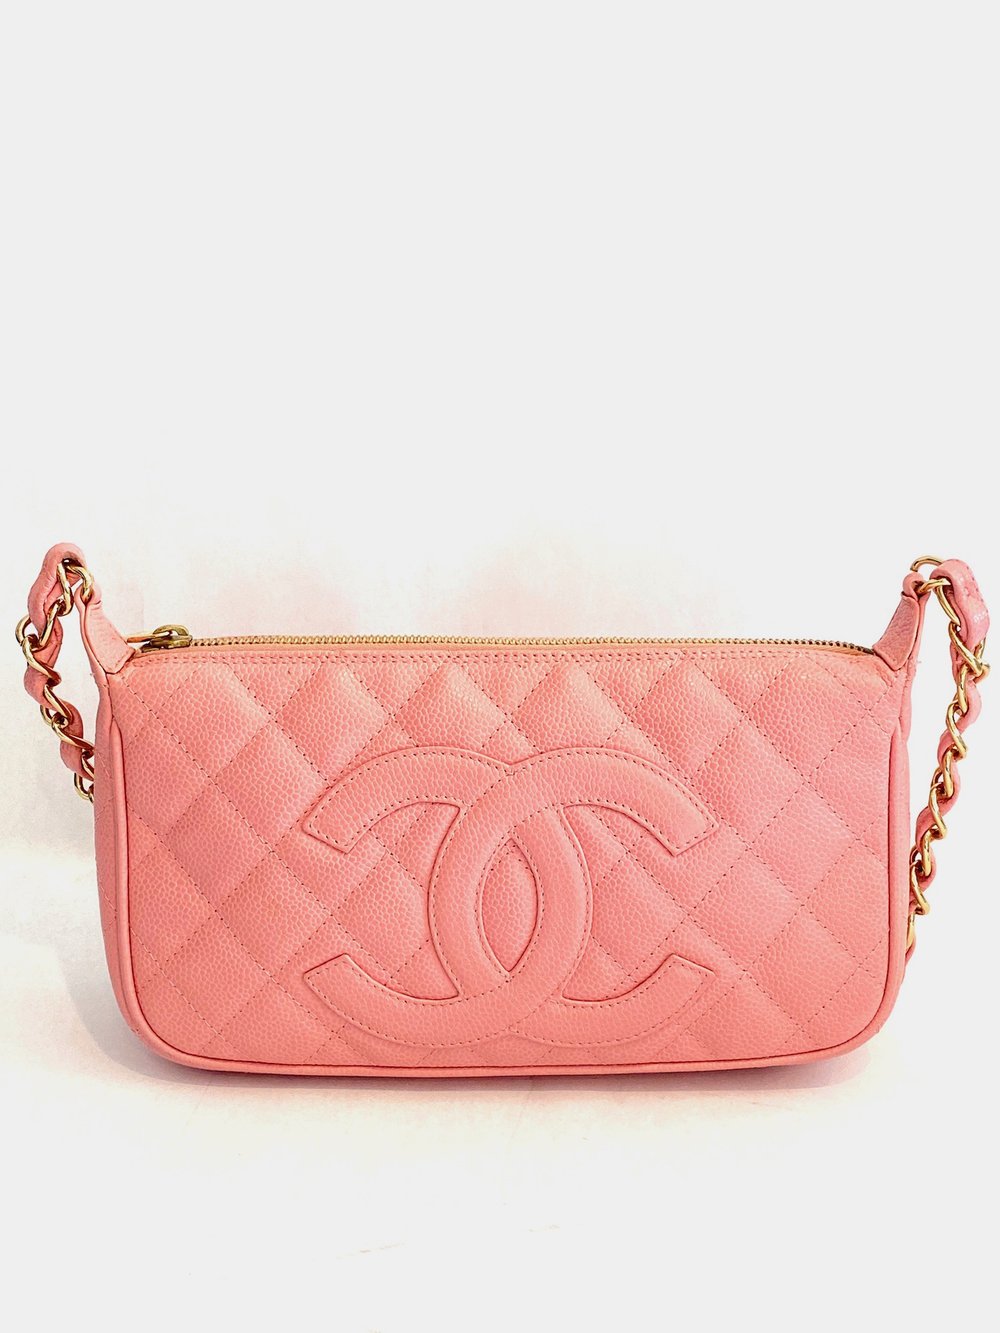 chanel beige shopping tote bag